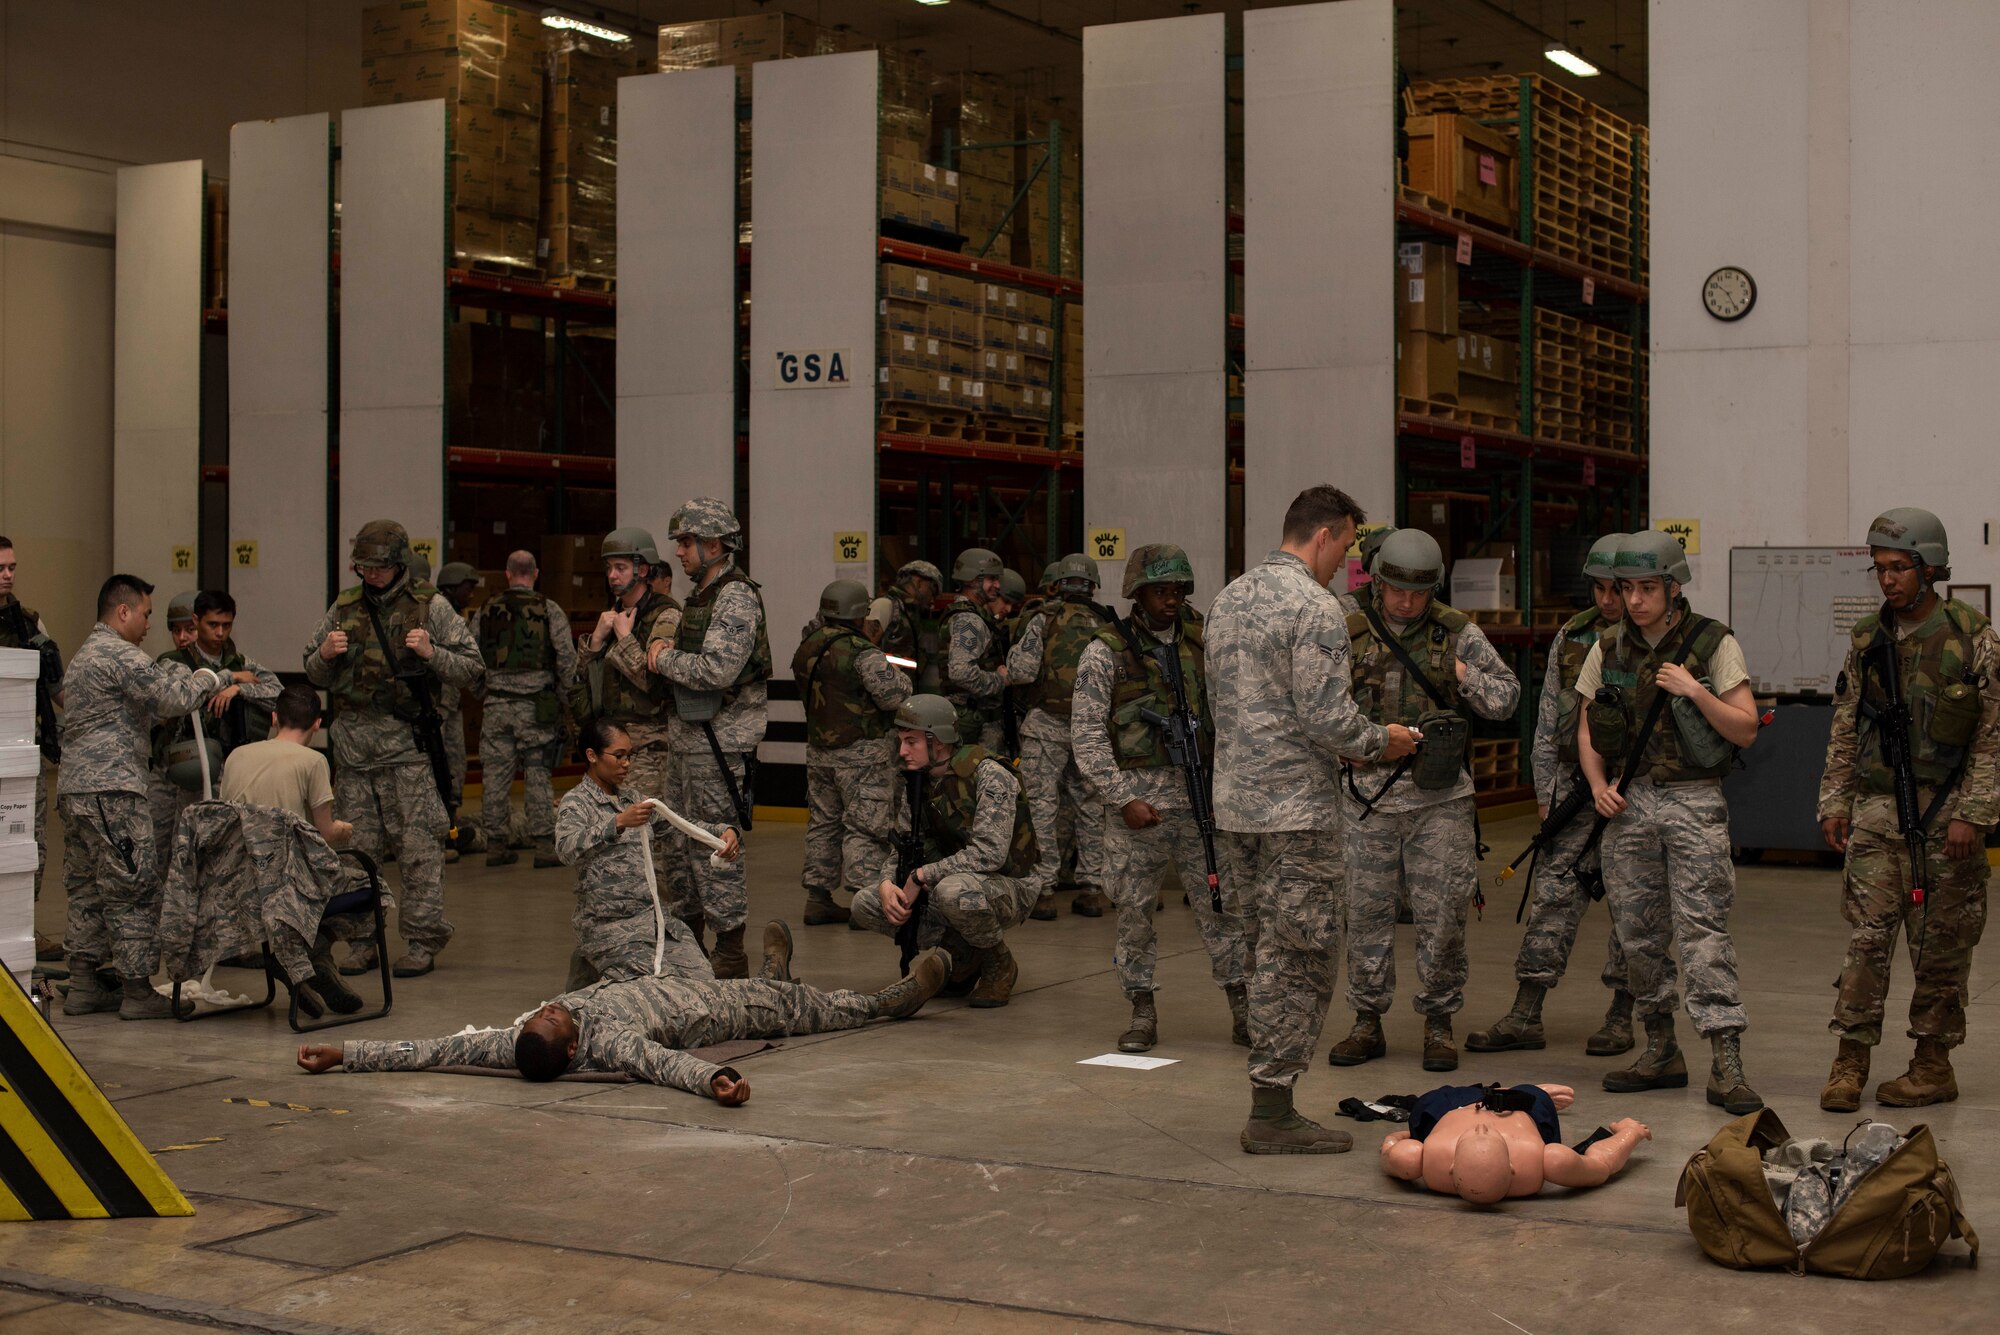 Airmen with the 35th Medical Group teach self-aid buddy care to 35th Logistics Readiness Squadron Airmen during an agile combat employment exercise at Misawa Air Base, Japan, June 28, 2019. Nearly 75 LRS Airmen learned proper tools and techniques to save lives in case of a real-real-world scenario. (U.S. Air Force photo by Staff Sgt. Brittany A. Chase)